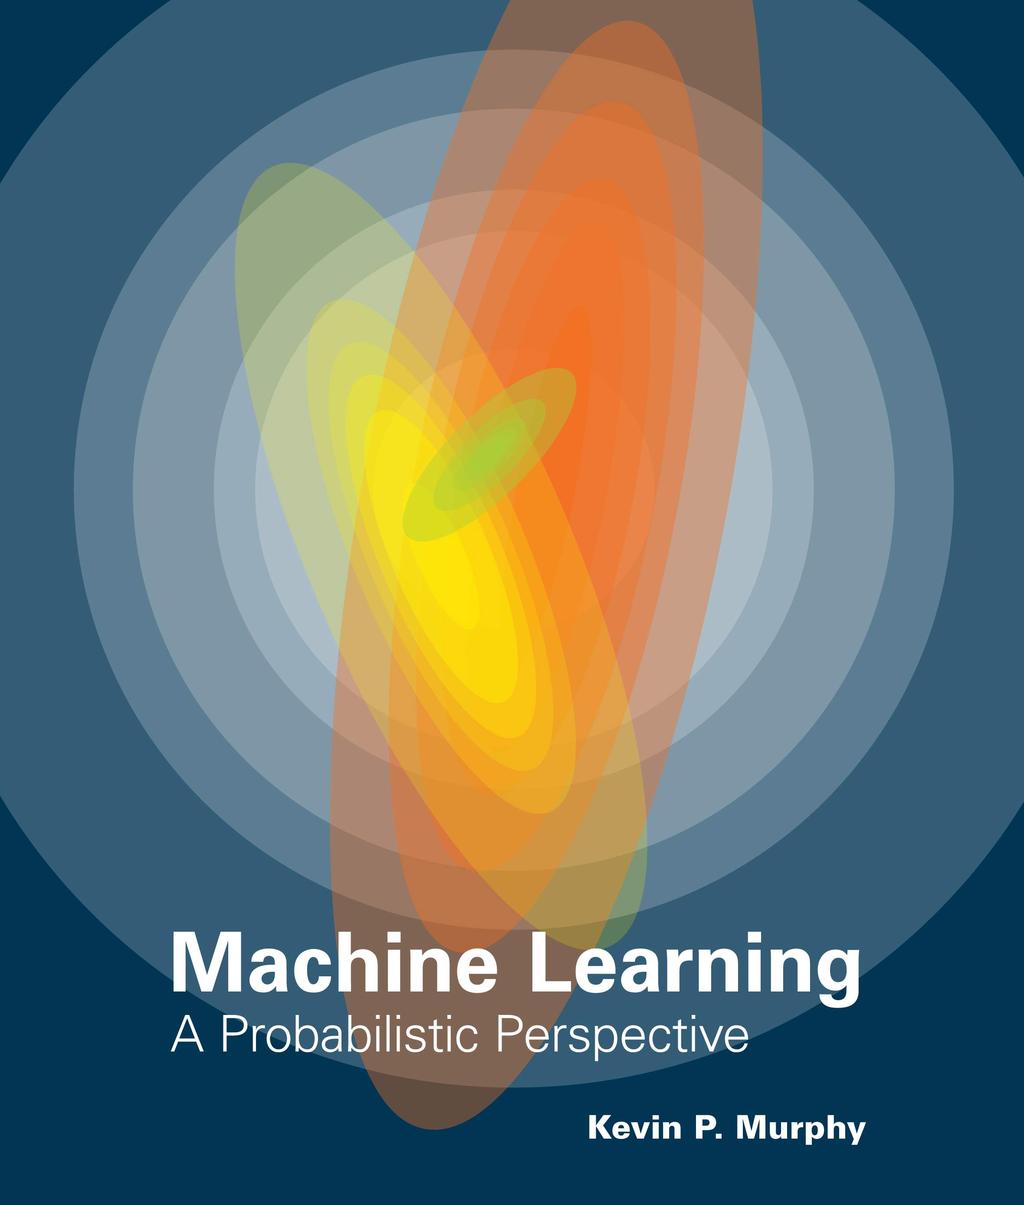 Buy the book by Kevin Murphy: The three teachers Jens Lagergren Carl Henrik Hedvig Kjellström Introduction to Machine Learning Murphy Chapter 1 Learning outcomes Course Preliminaries Upon completion